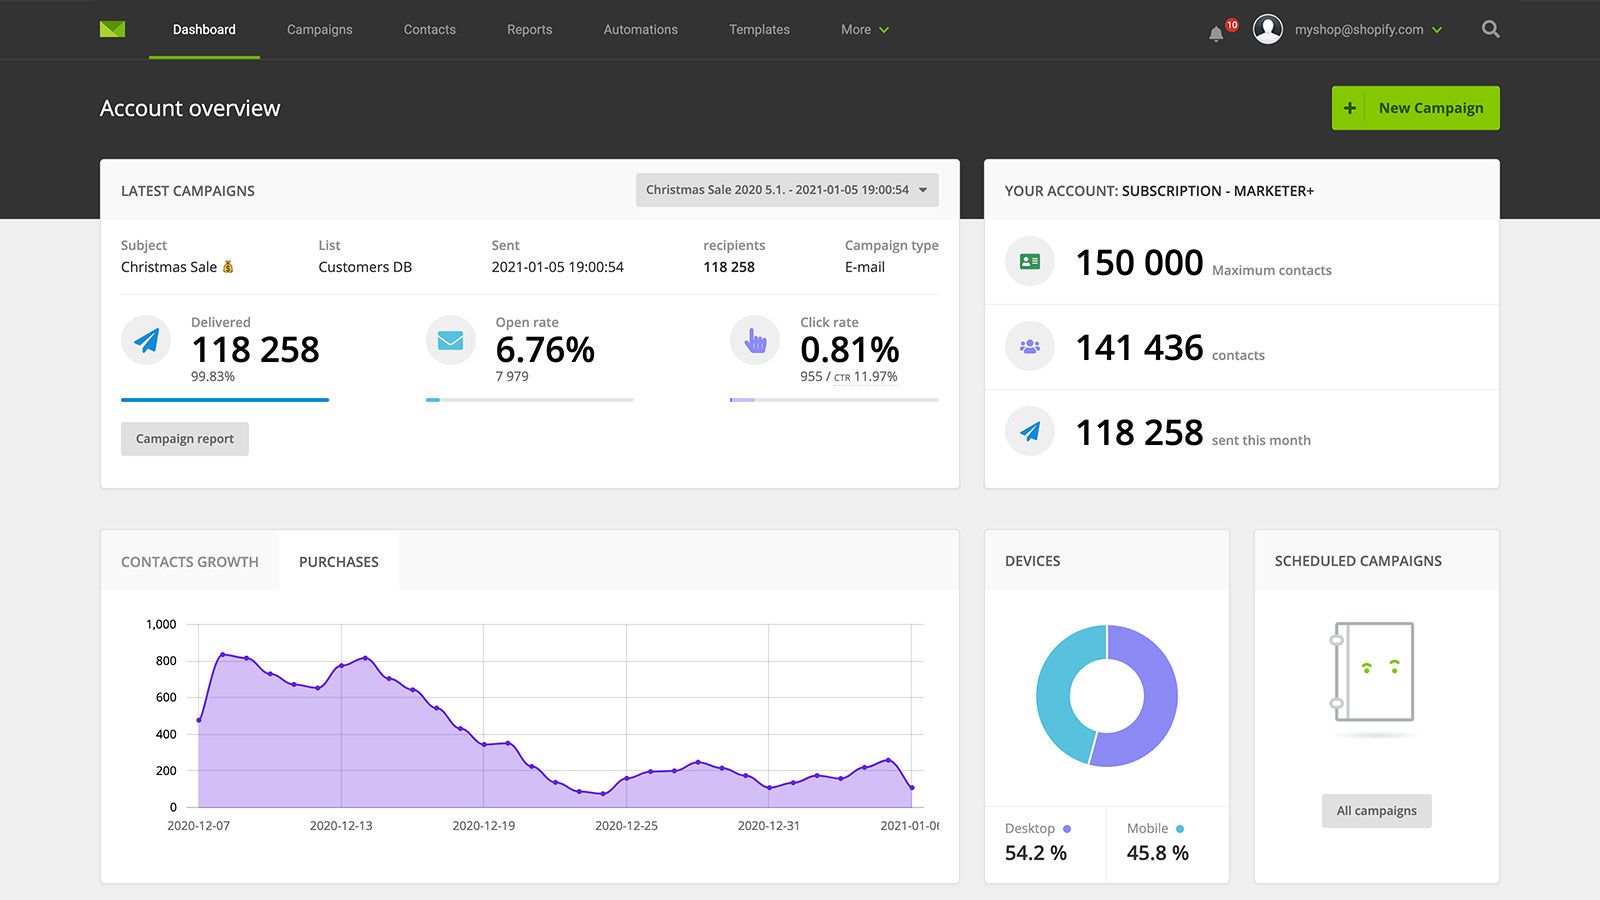 Dashboard - last campaign data, purchases, contact growth & more